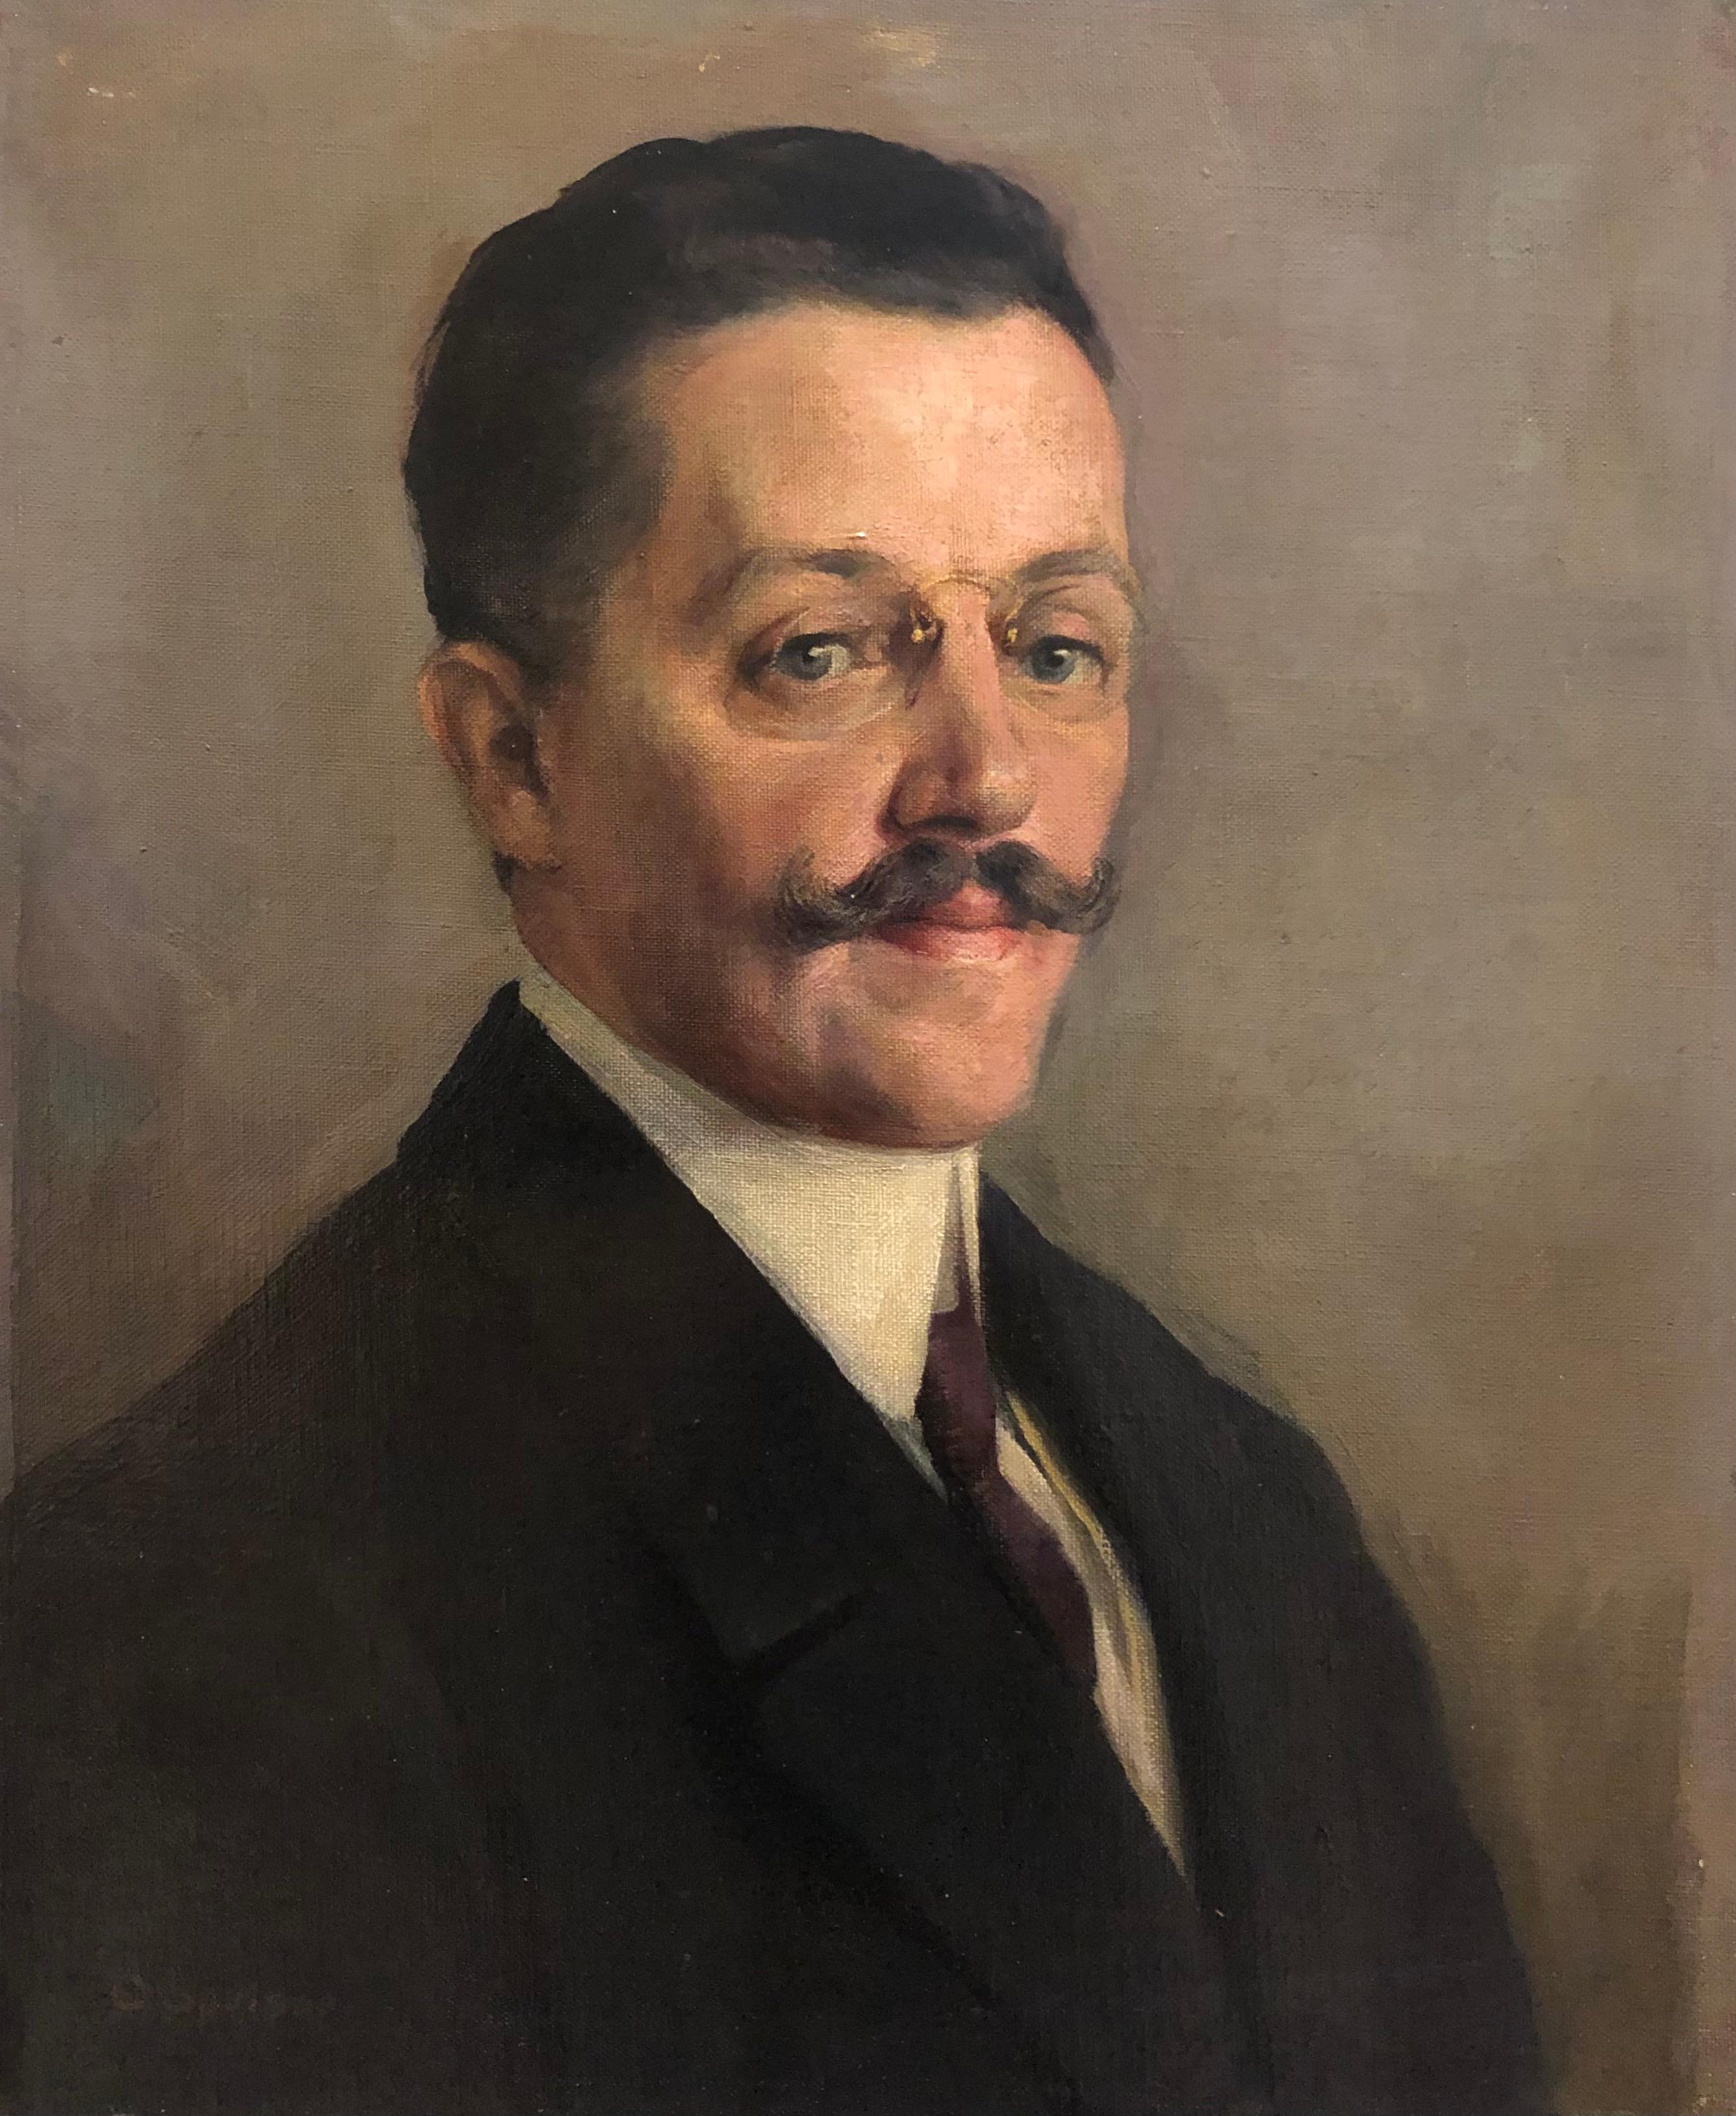 Unknown Portrait Painting - Man with mustache and glasses